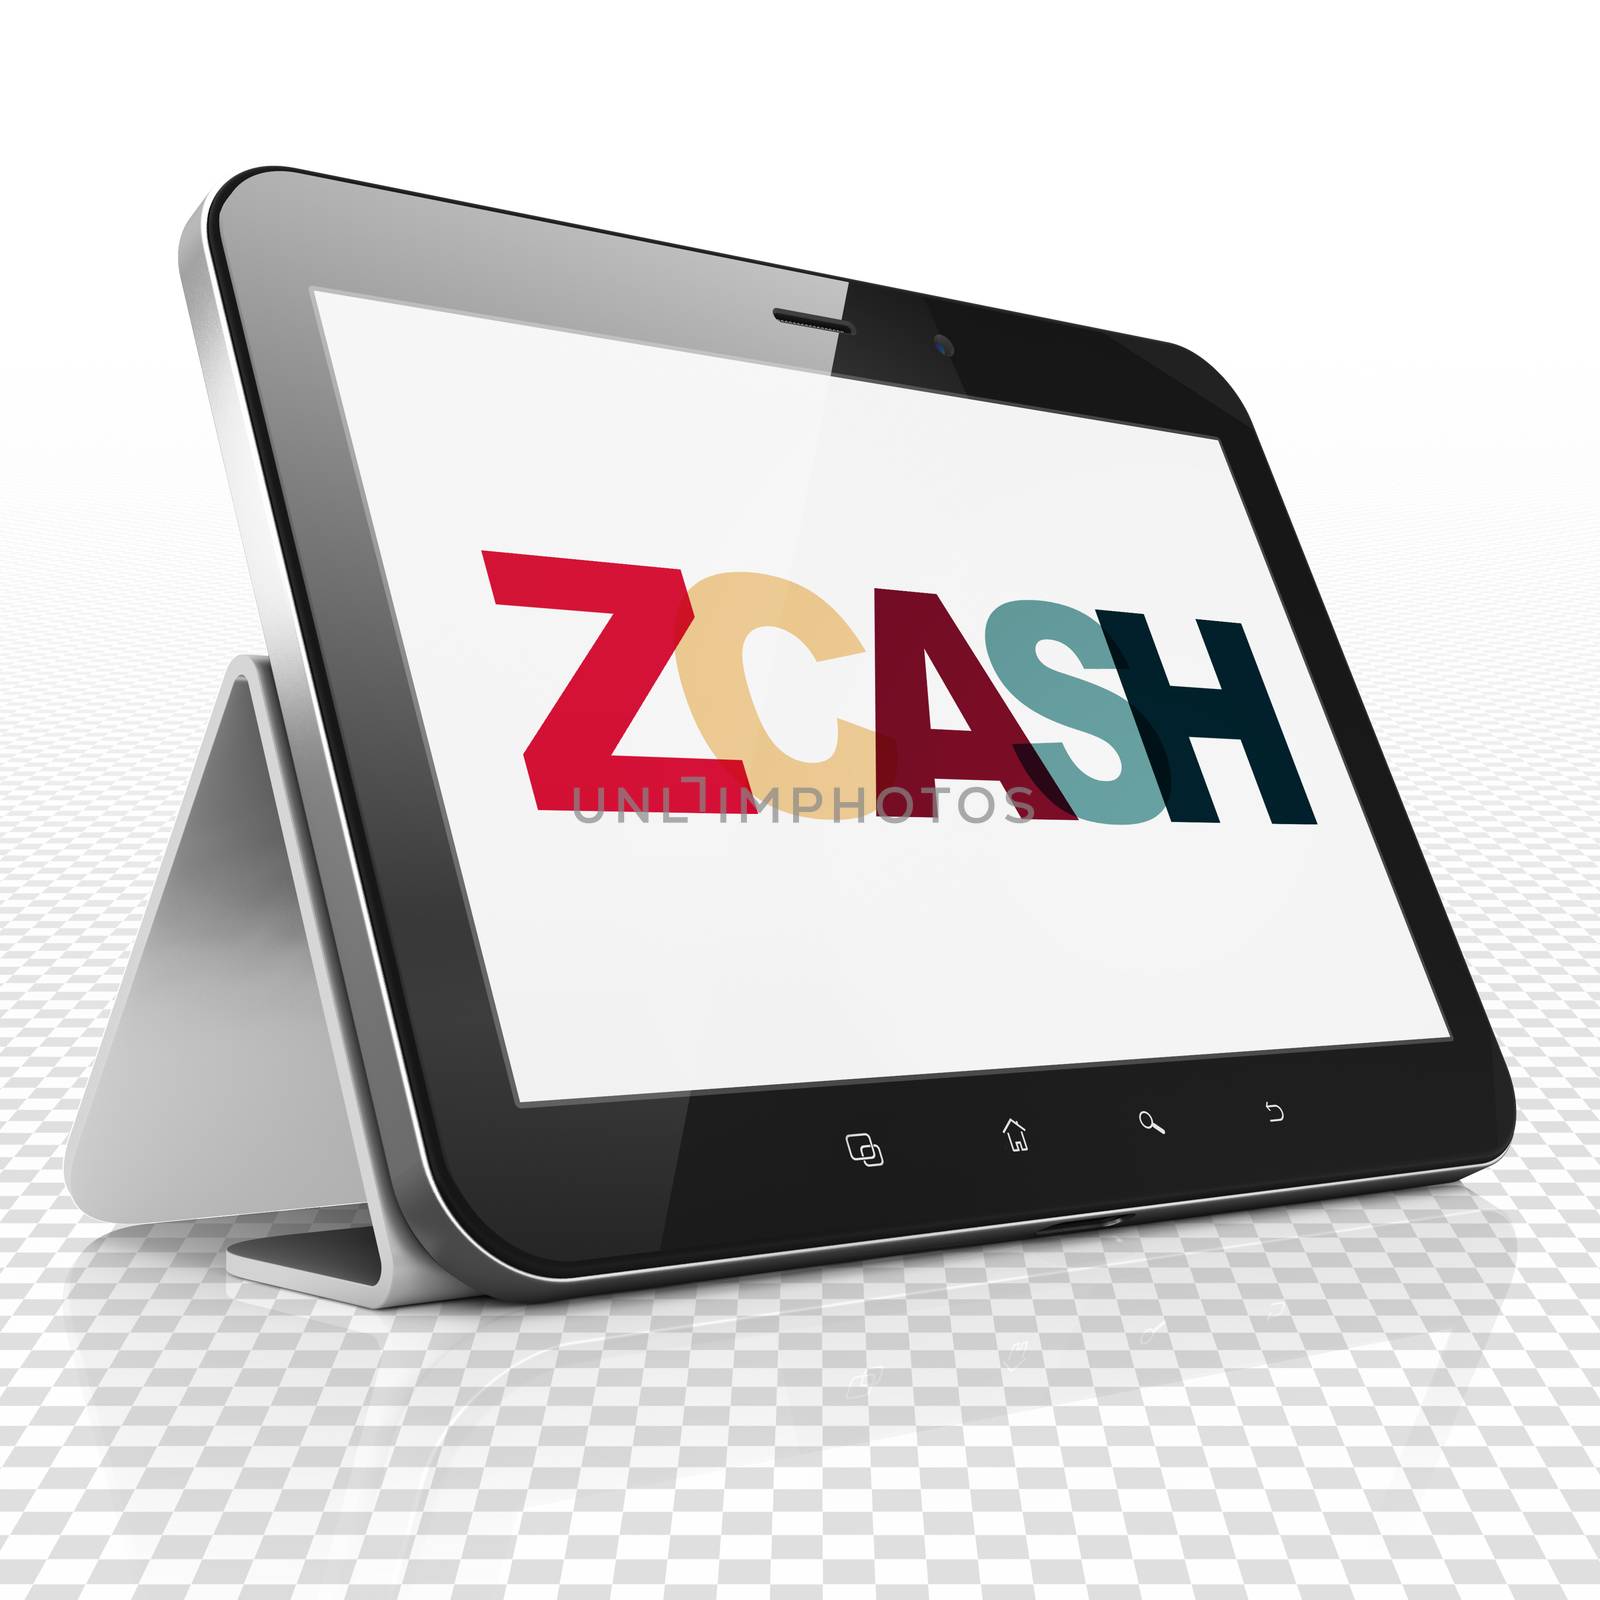 Cryptocurrency concept: Tablet Computer with Painted multicolor text Zcash on display, 3D rendering